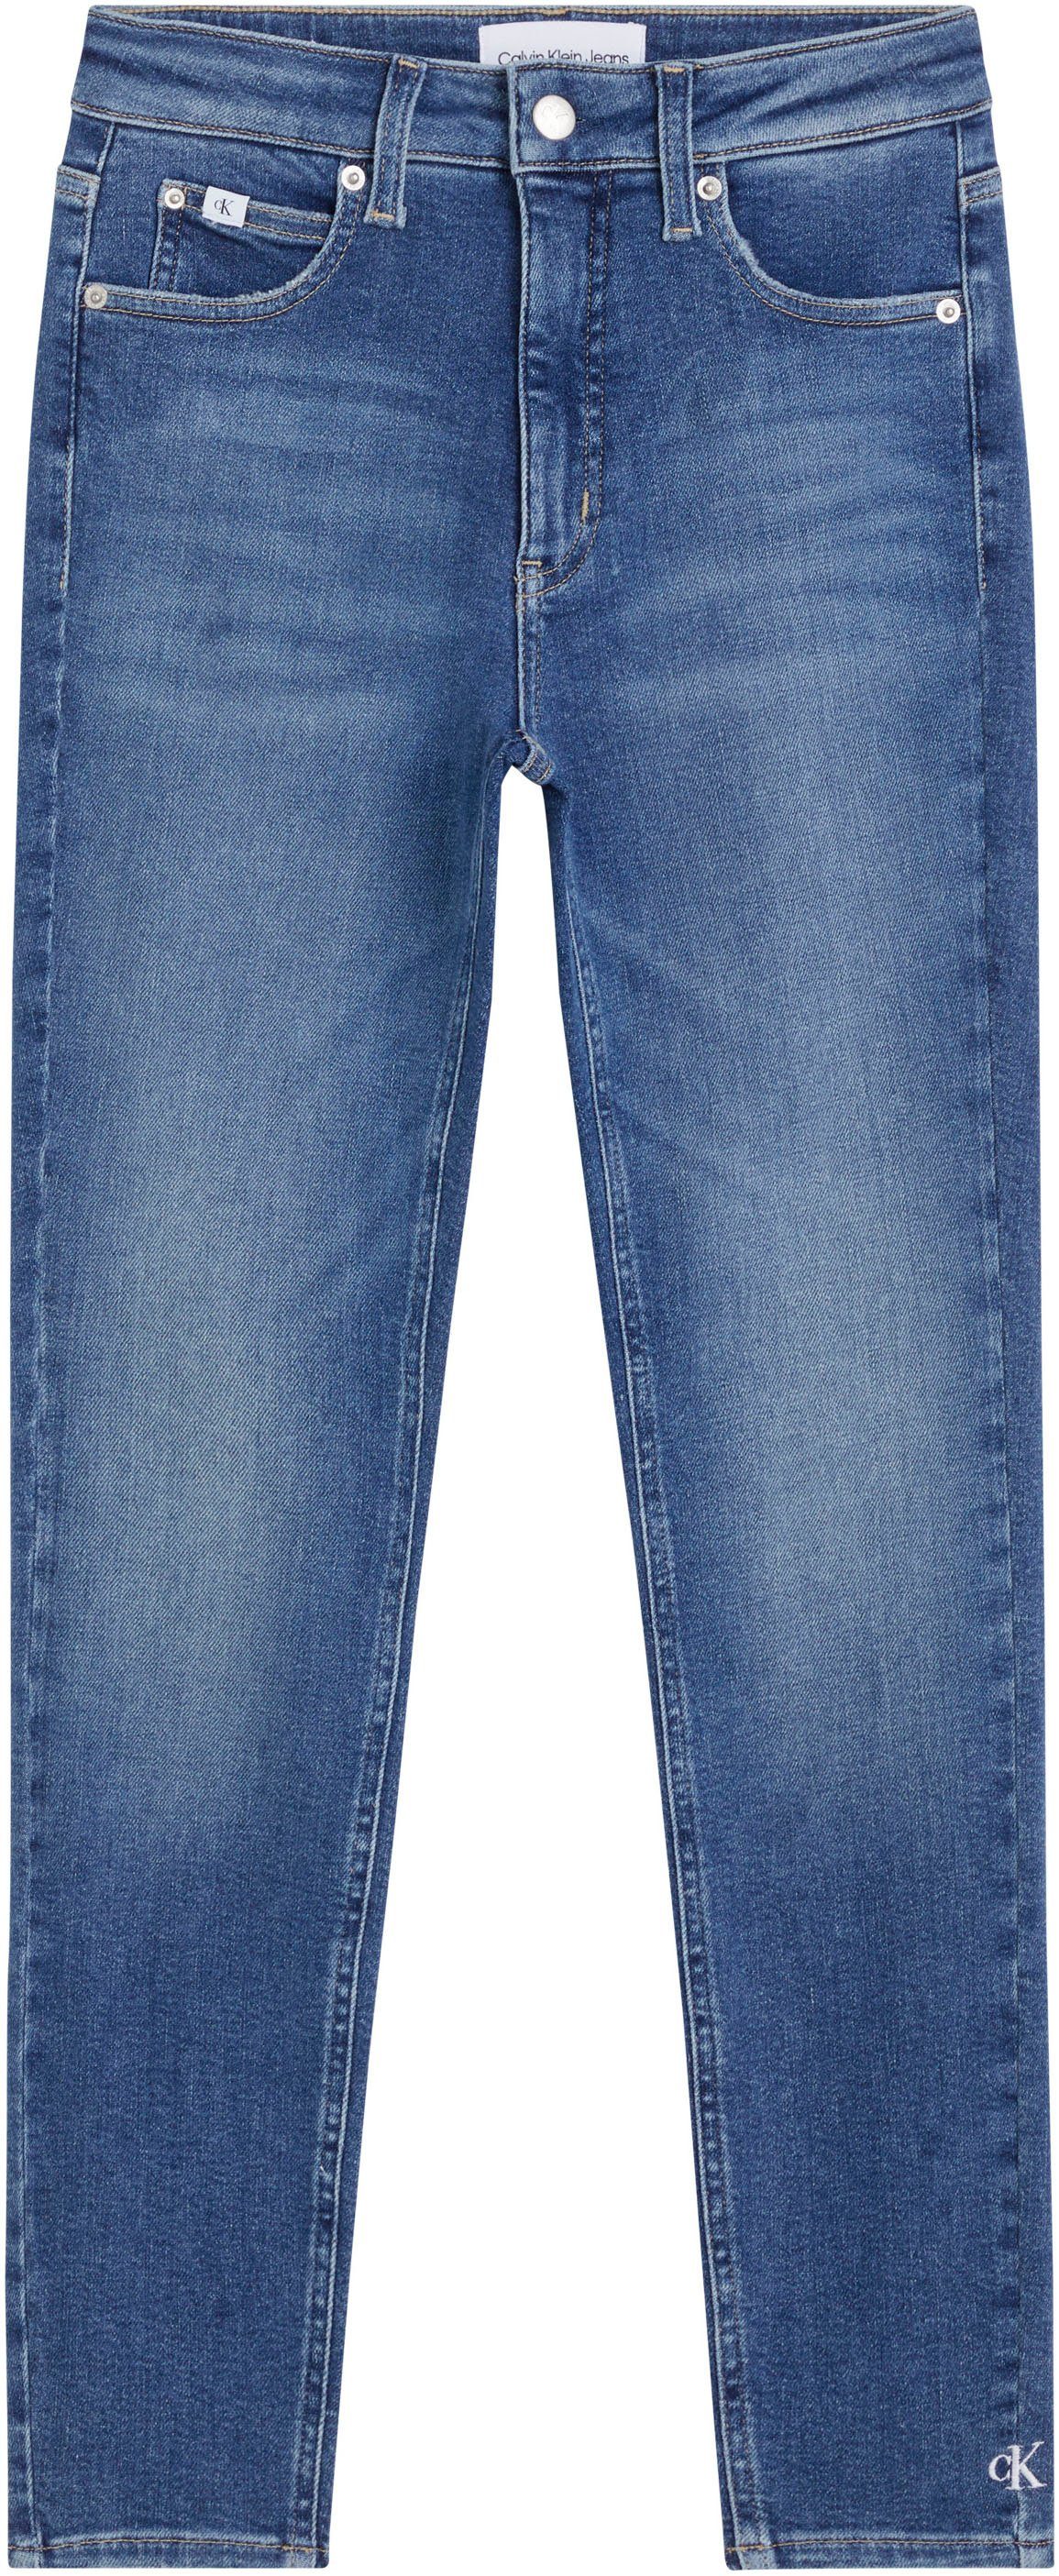 ANKLE SUPER HIGH RISE Jeans SKINNY Ankle-Jeans Calvin Klein